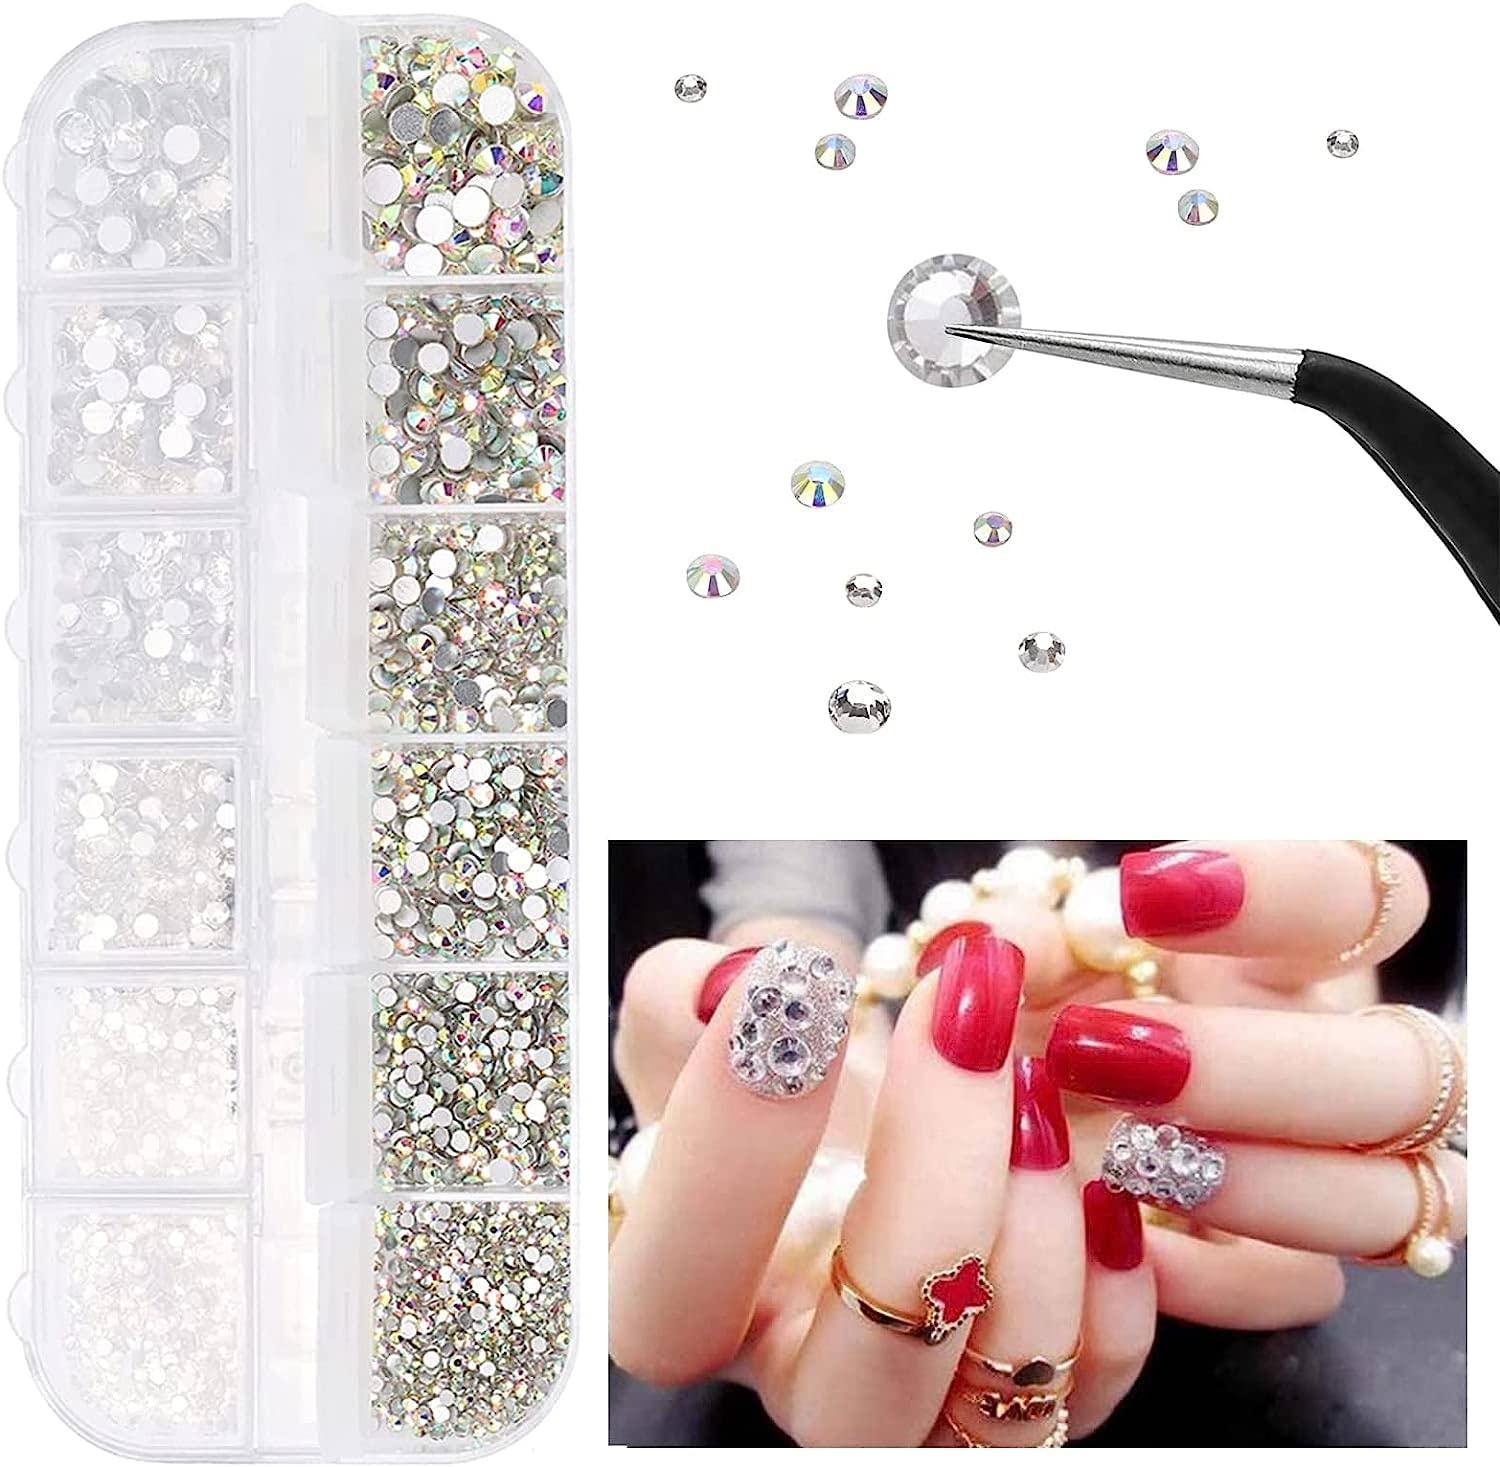 Hot Item] Crystals Flat Back Gems Rhinestone for Nails Art and